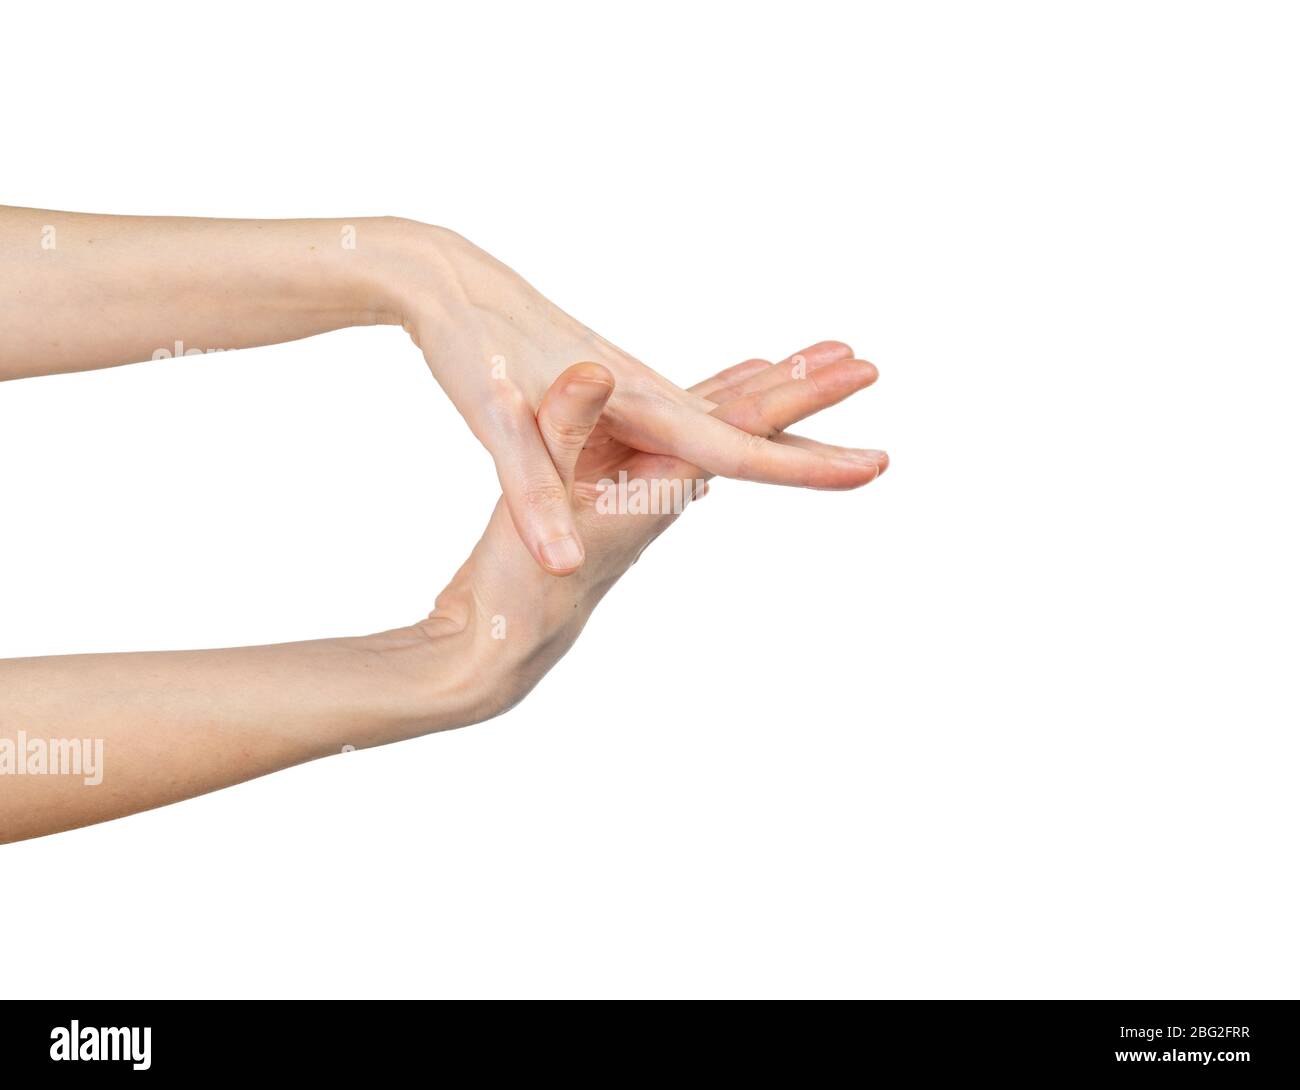 Caucasian woman washing her hands isolated on white background. Demonstration of hand washing. Concept of hygiene and prevention coronavirus. Stock Photo